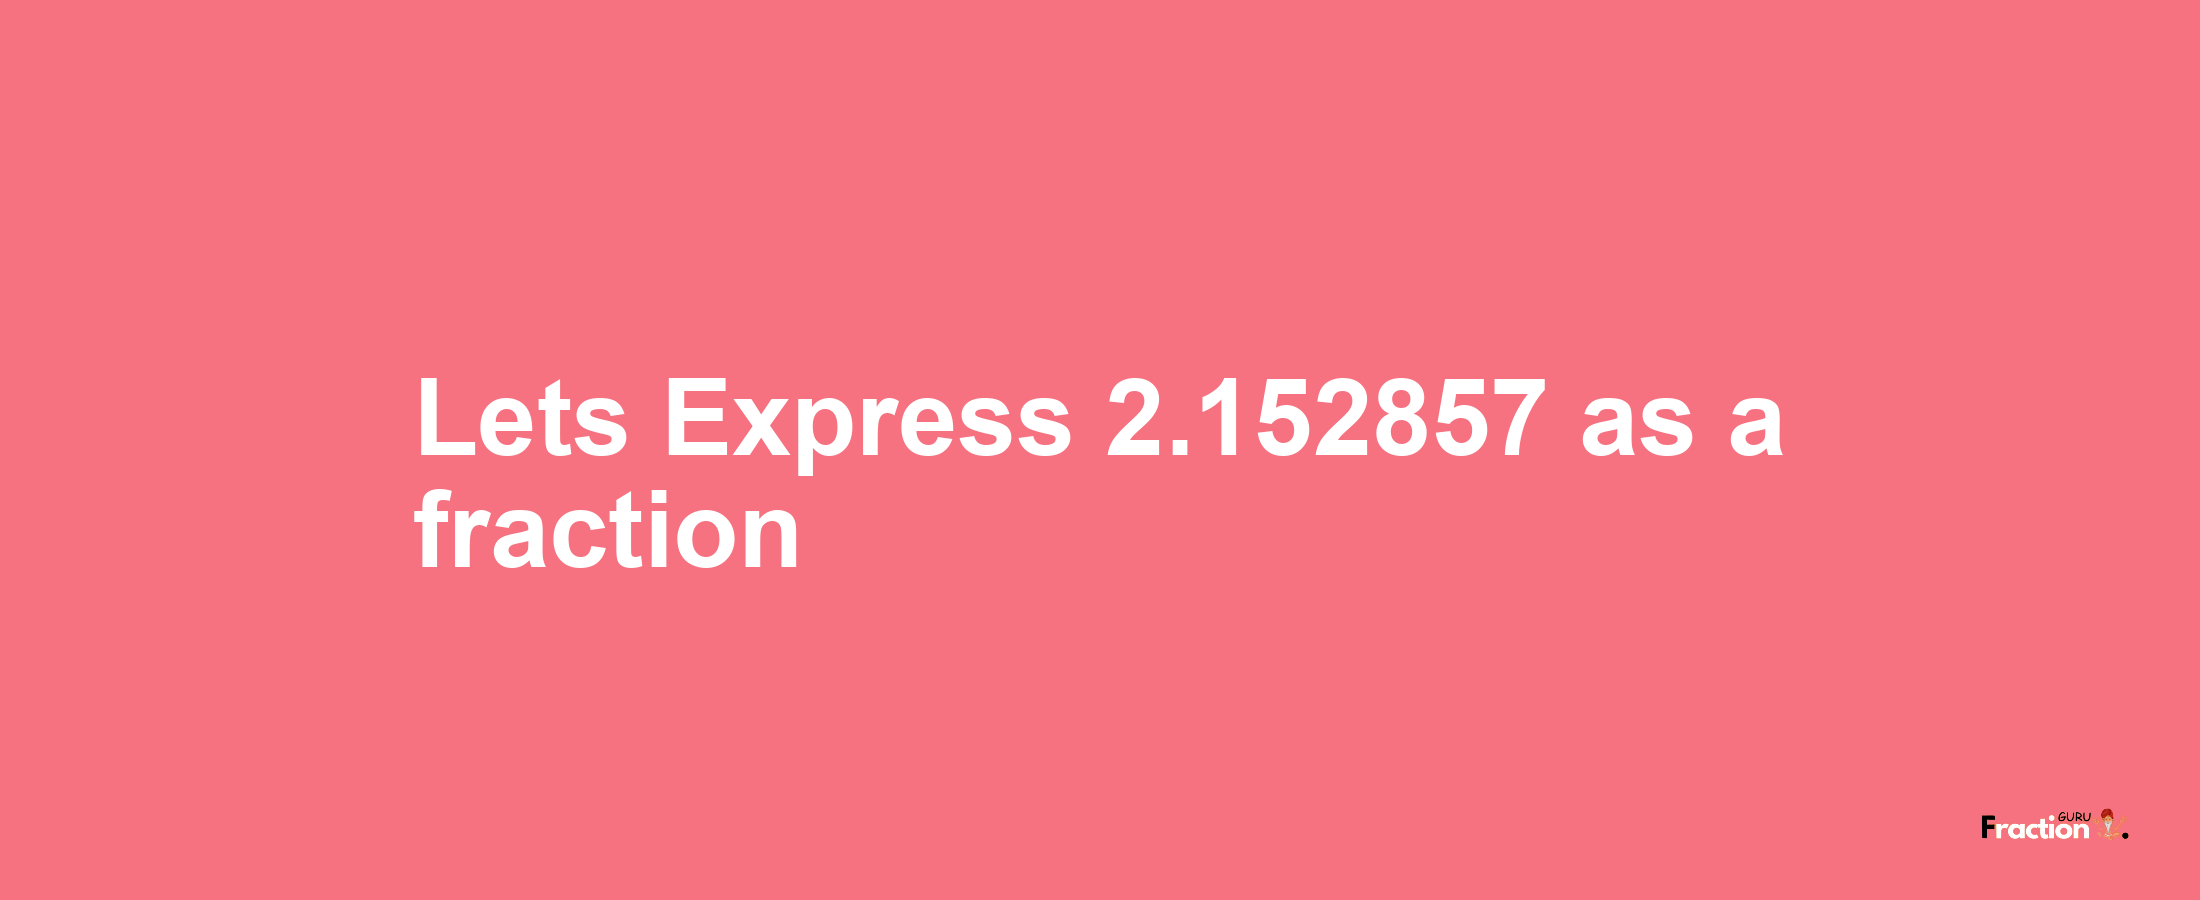 Lets Express 2.152857 as afraction